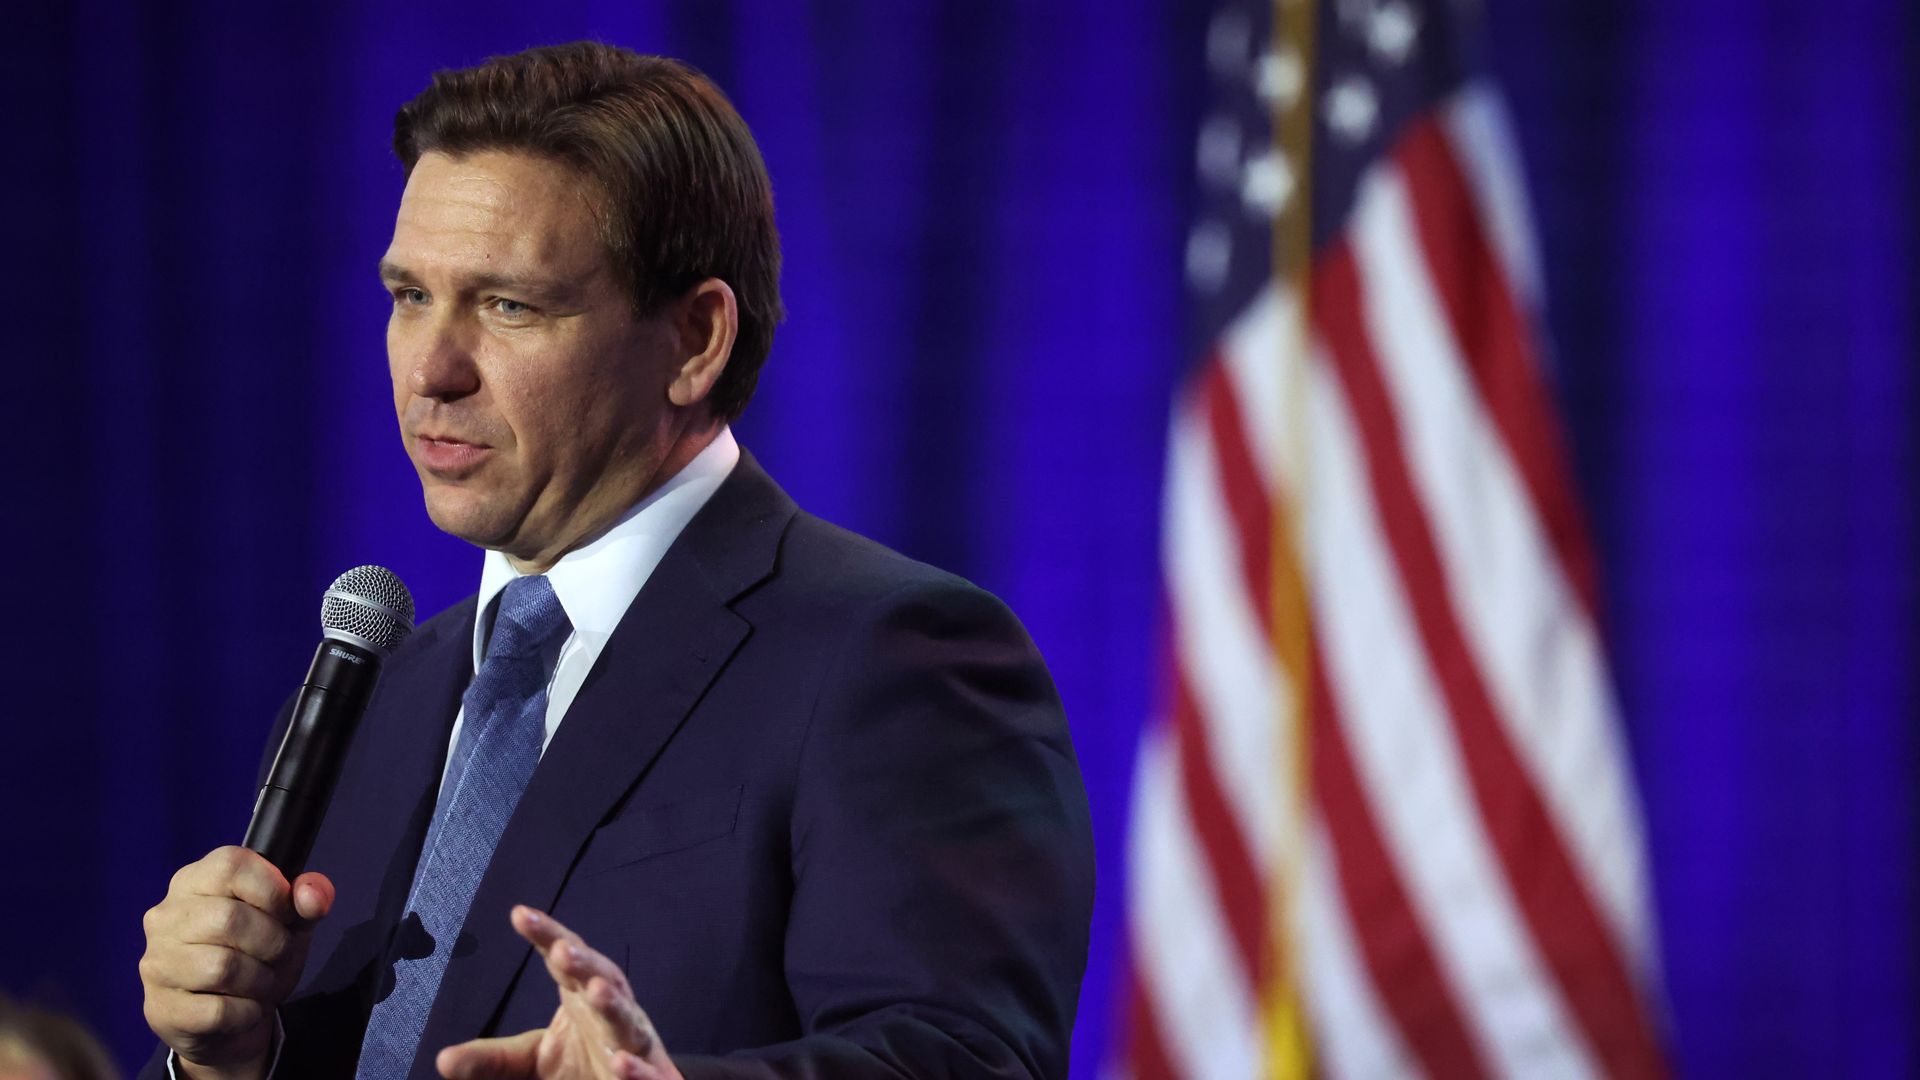 Photo of Ron DeSantis speaking into a microphone on stage